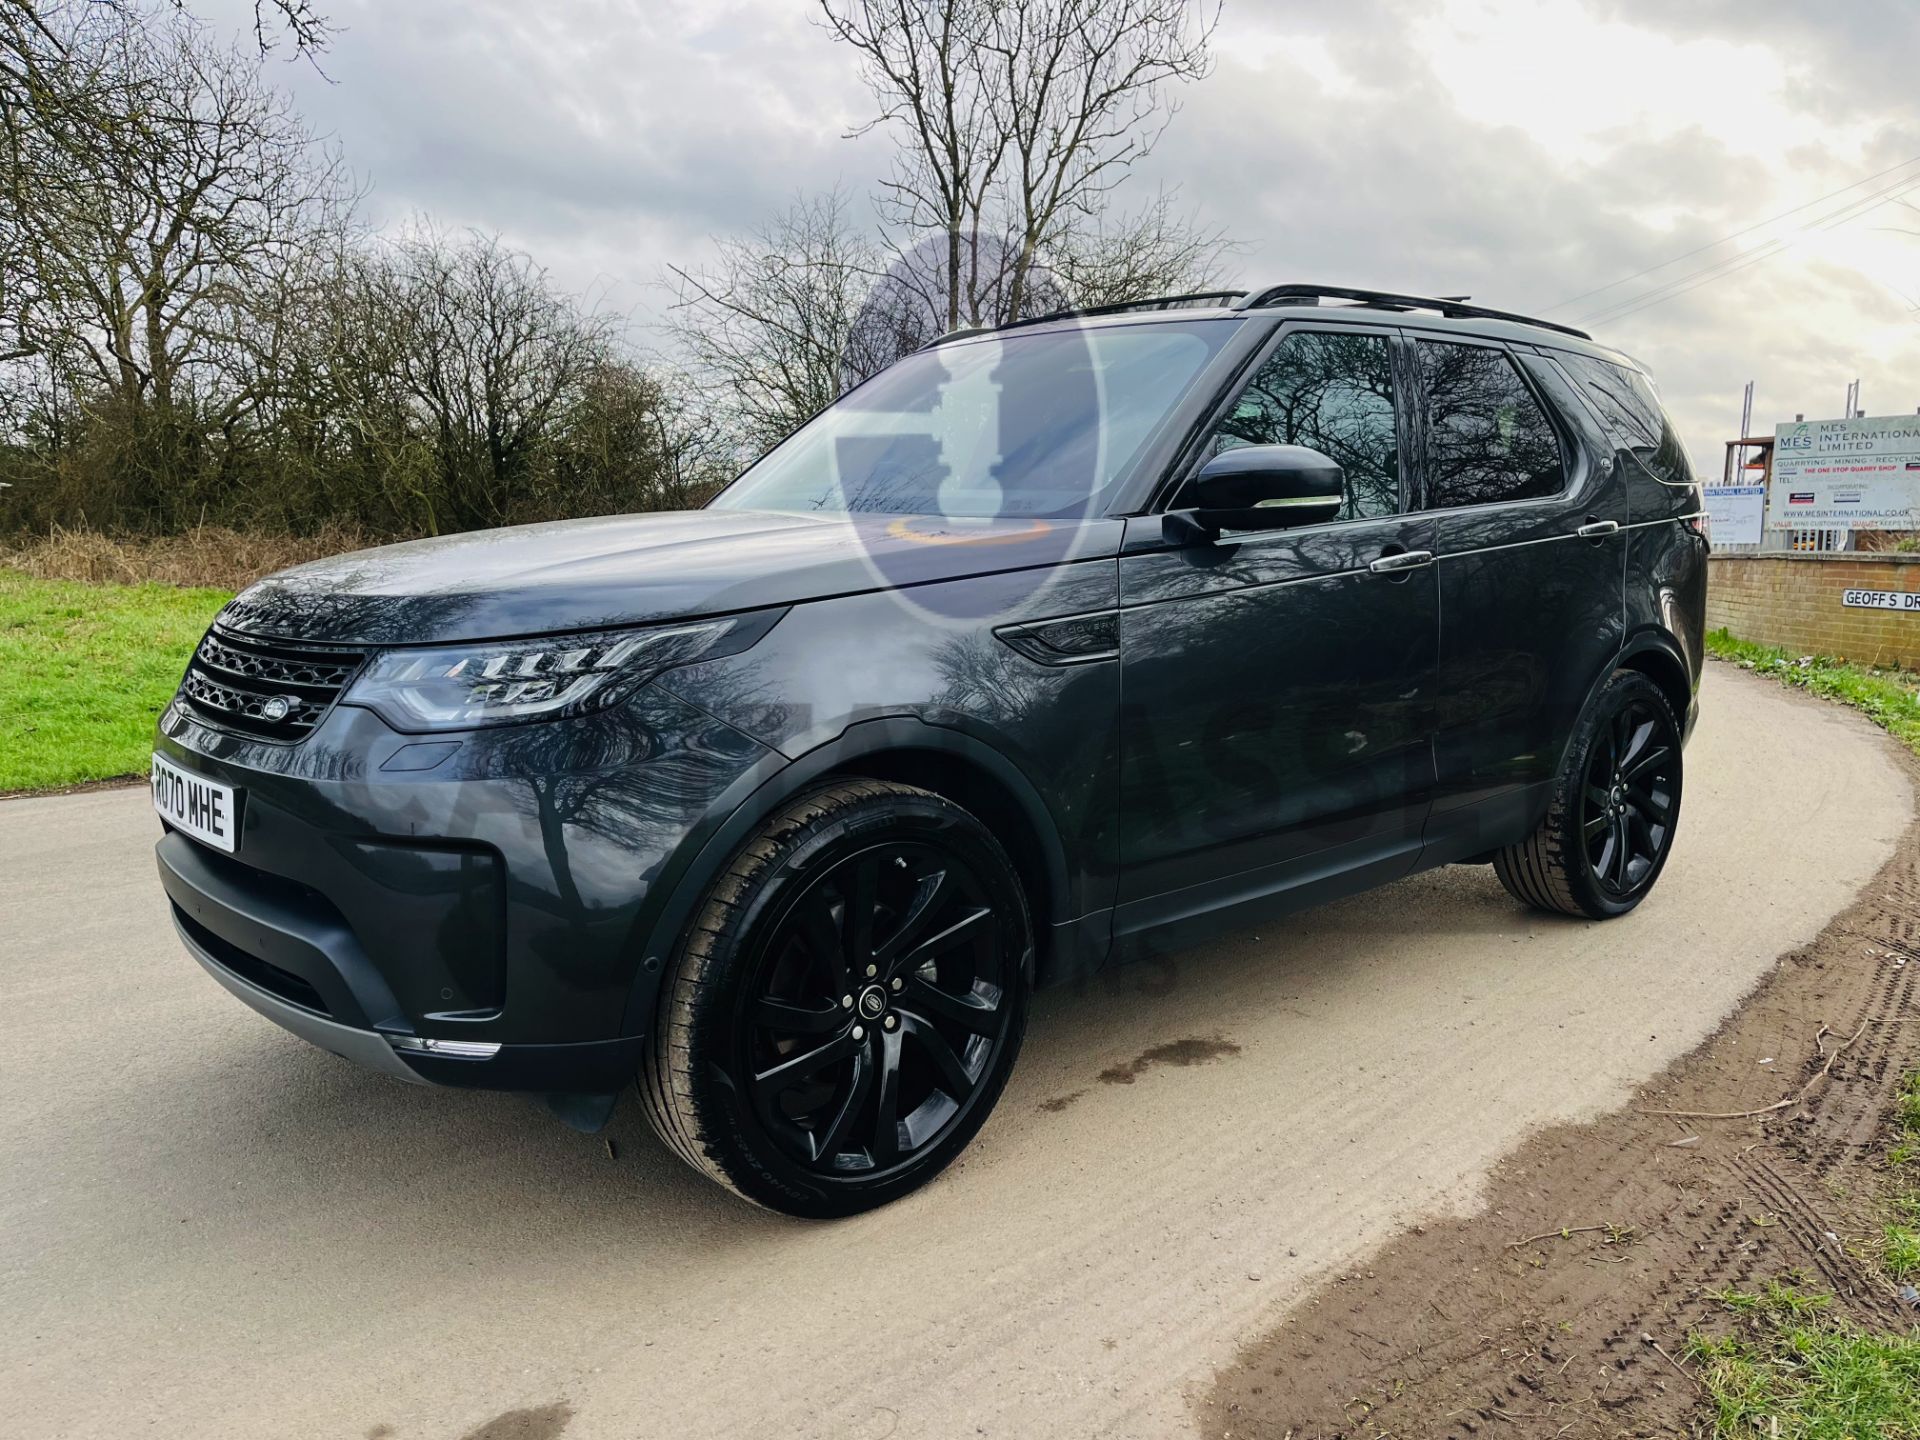 (ON SALE) LAND ROVER DISCOVERY LUXURY HSE BLACK EDITION (2021 MODEL) ONLY 26000 MILES - LR HISTORY - Image 6 of 43